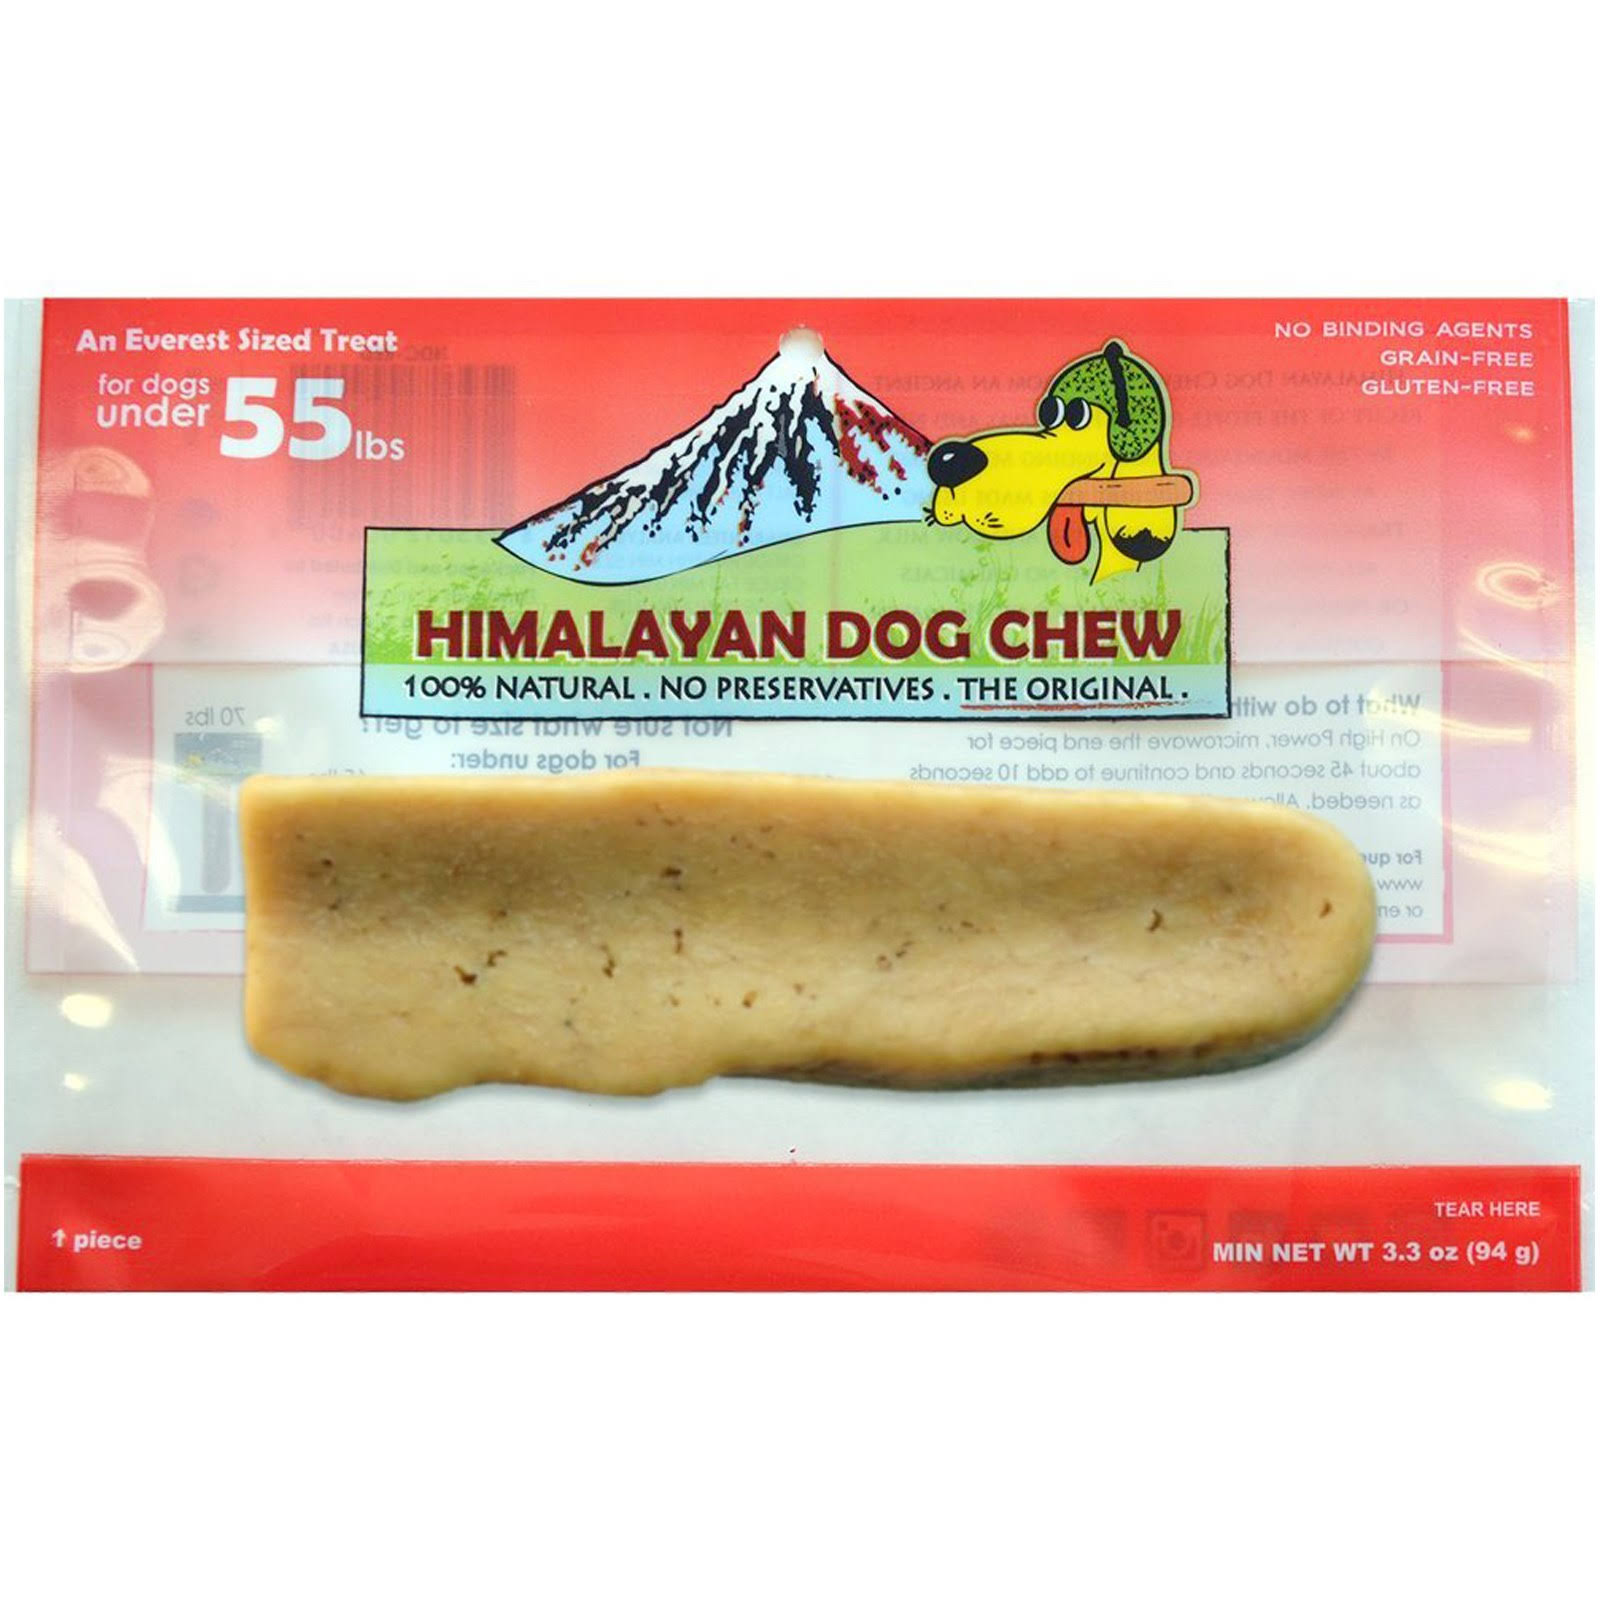 Himalayan Dog Chew, For Dogs Under 55 lbs, 1 Piece, Min 3.3 oz (94 g)